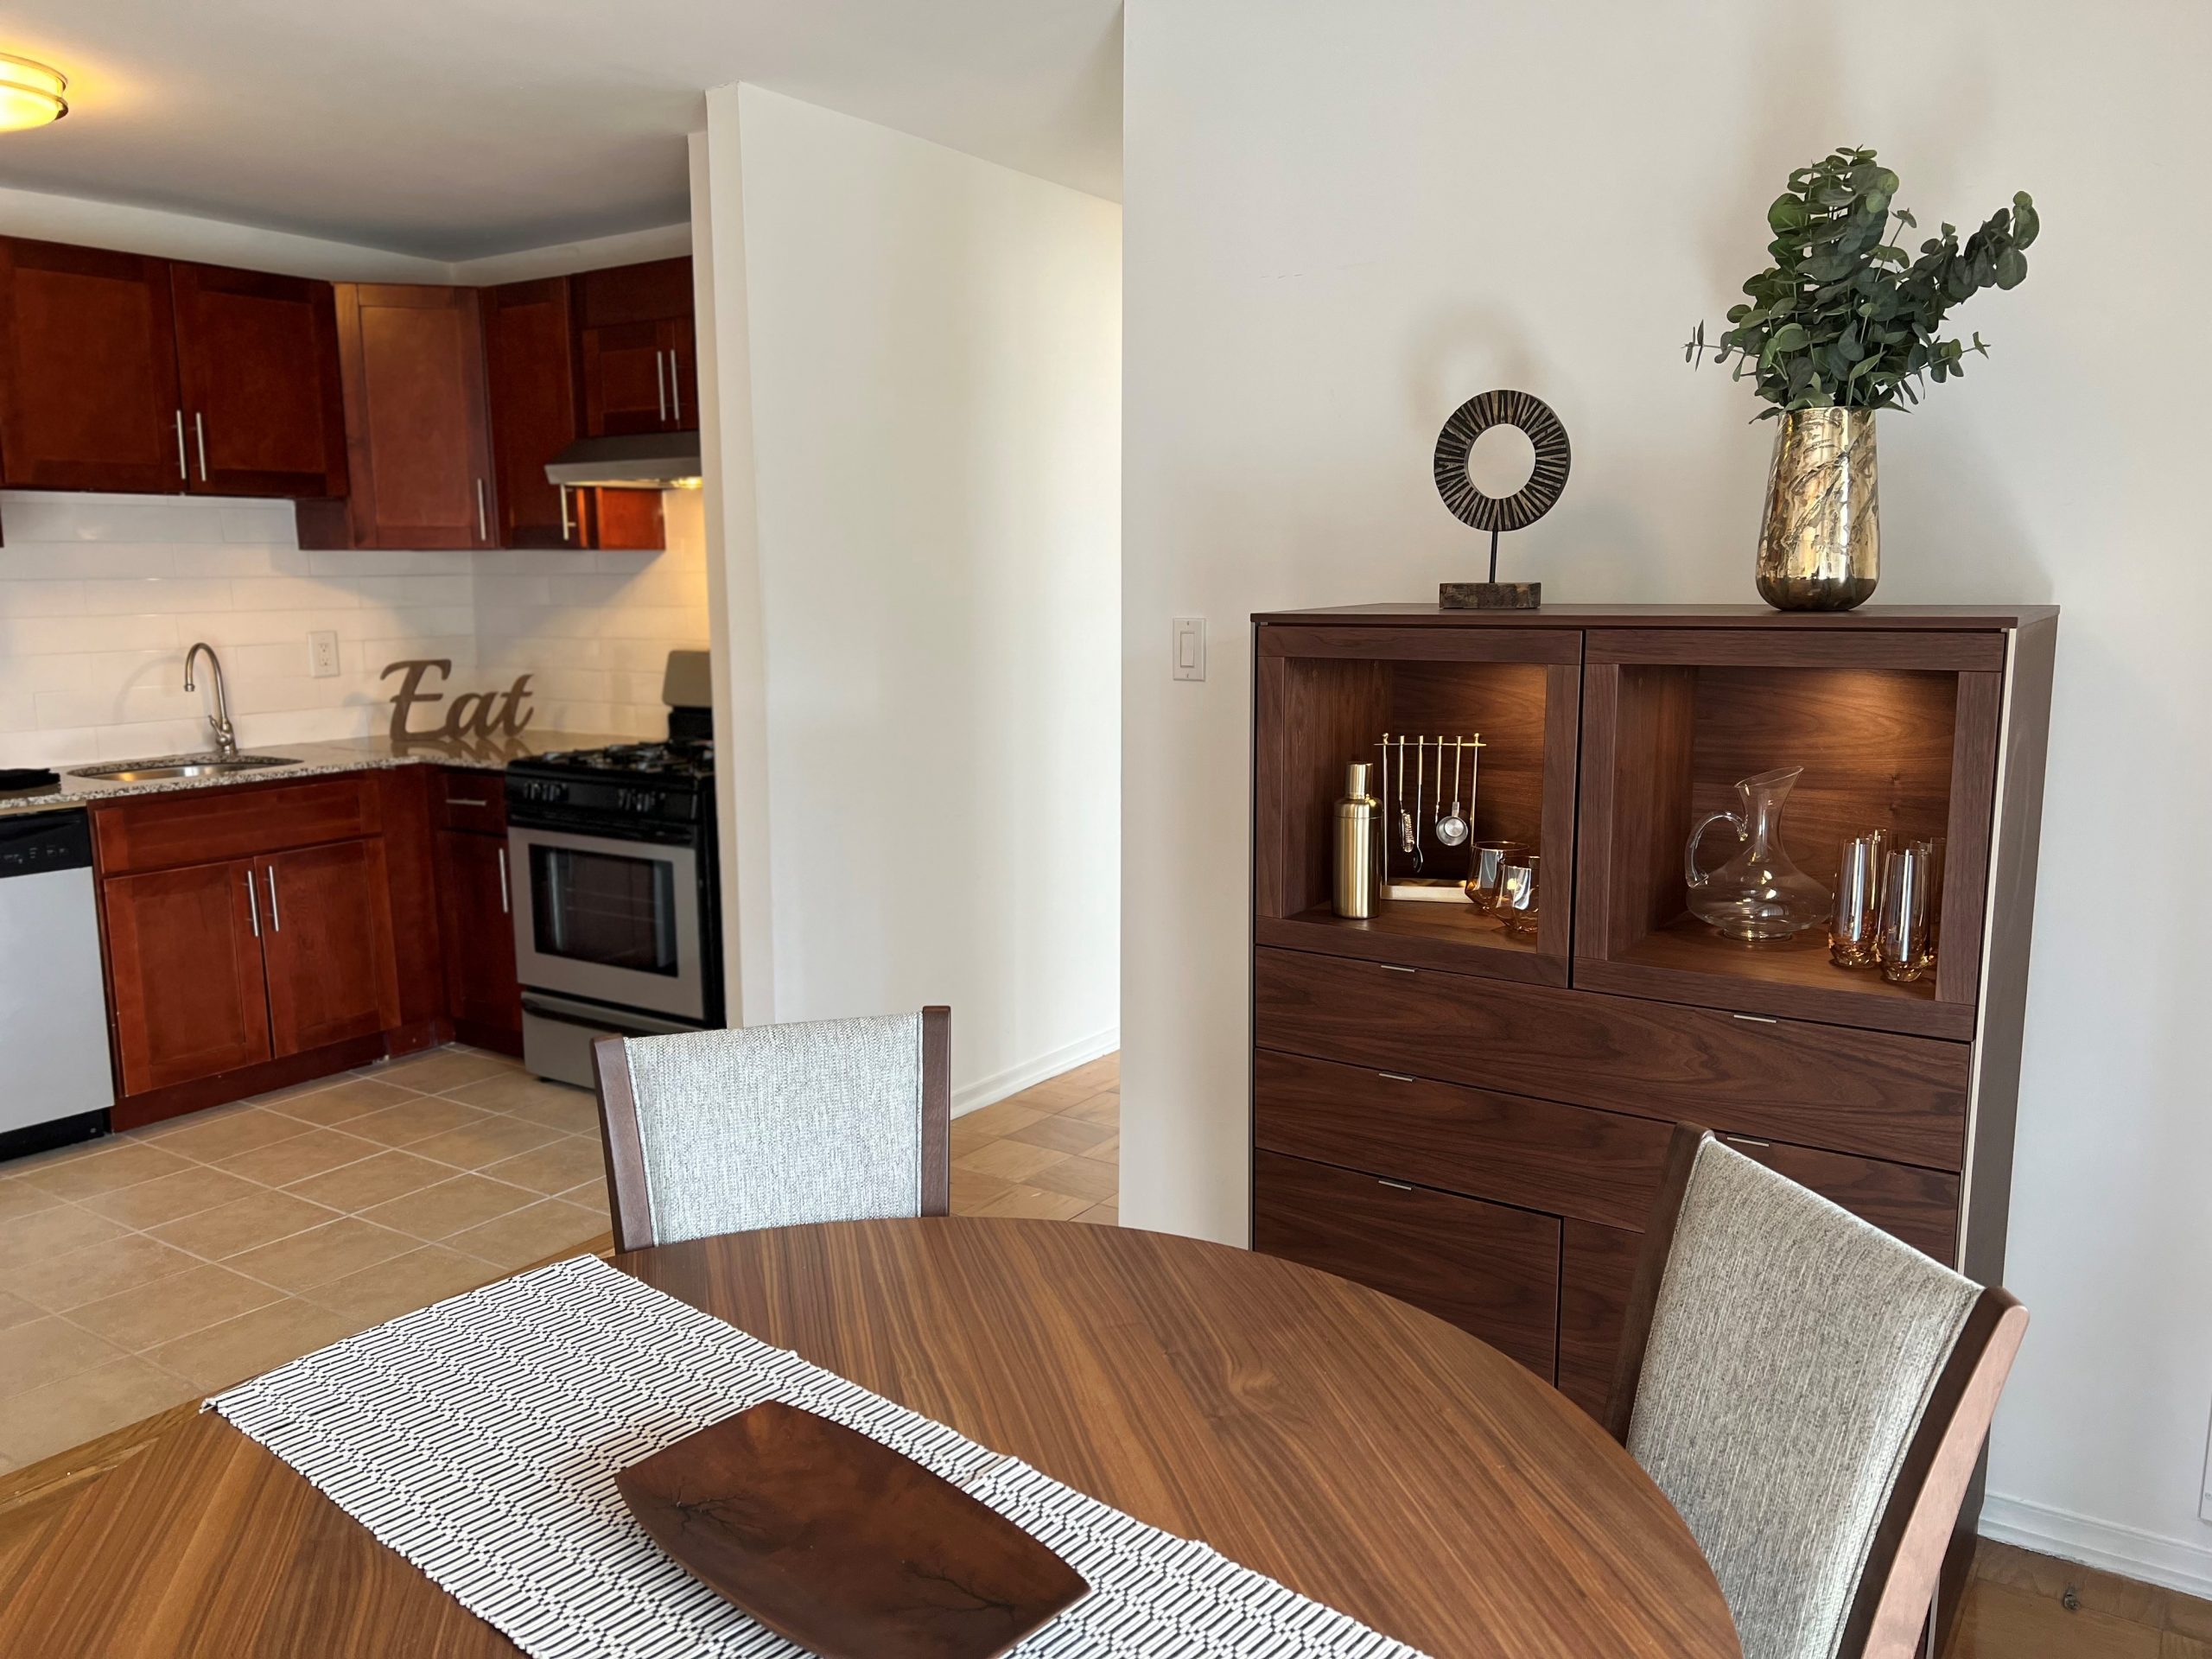 Newly Renovated Apartments are now available, contact the Leasing Office for more information